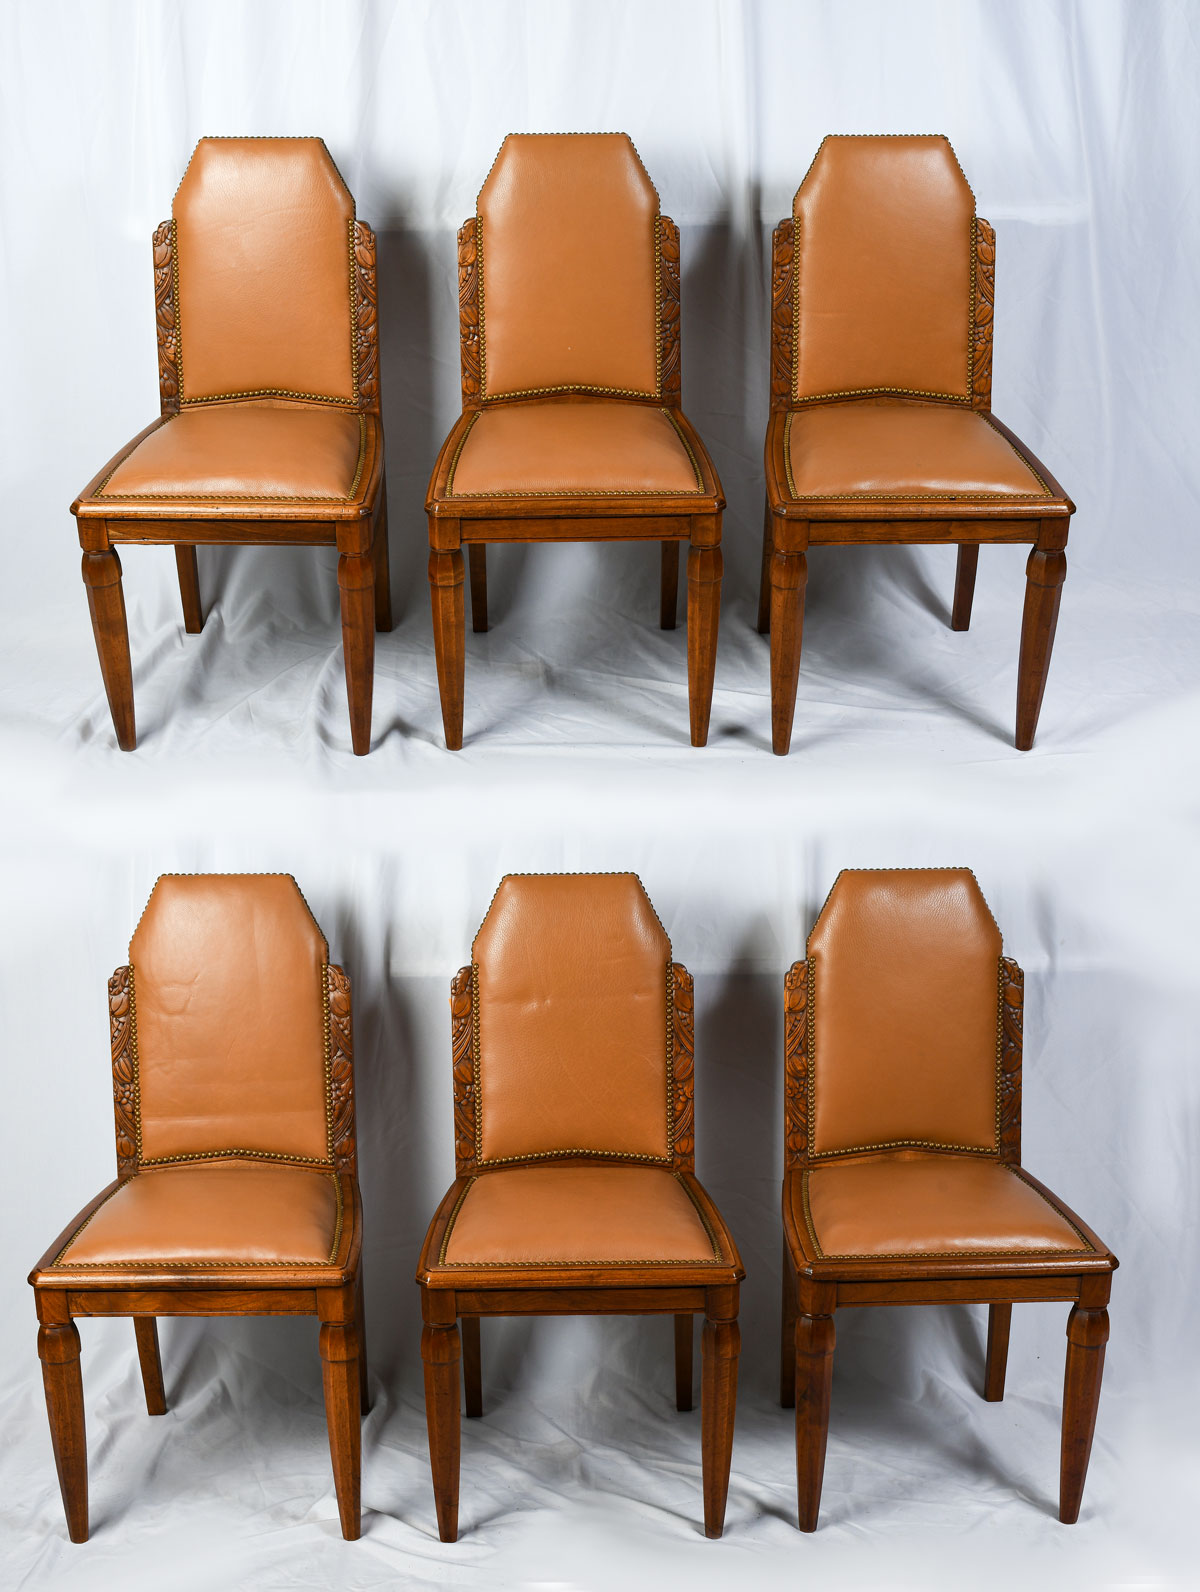 6 ART DECO DINING CHAIRS: Having tacked